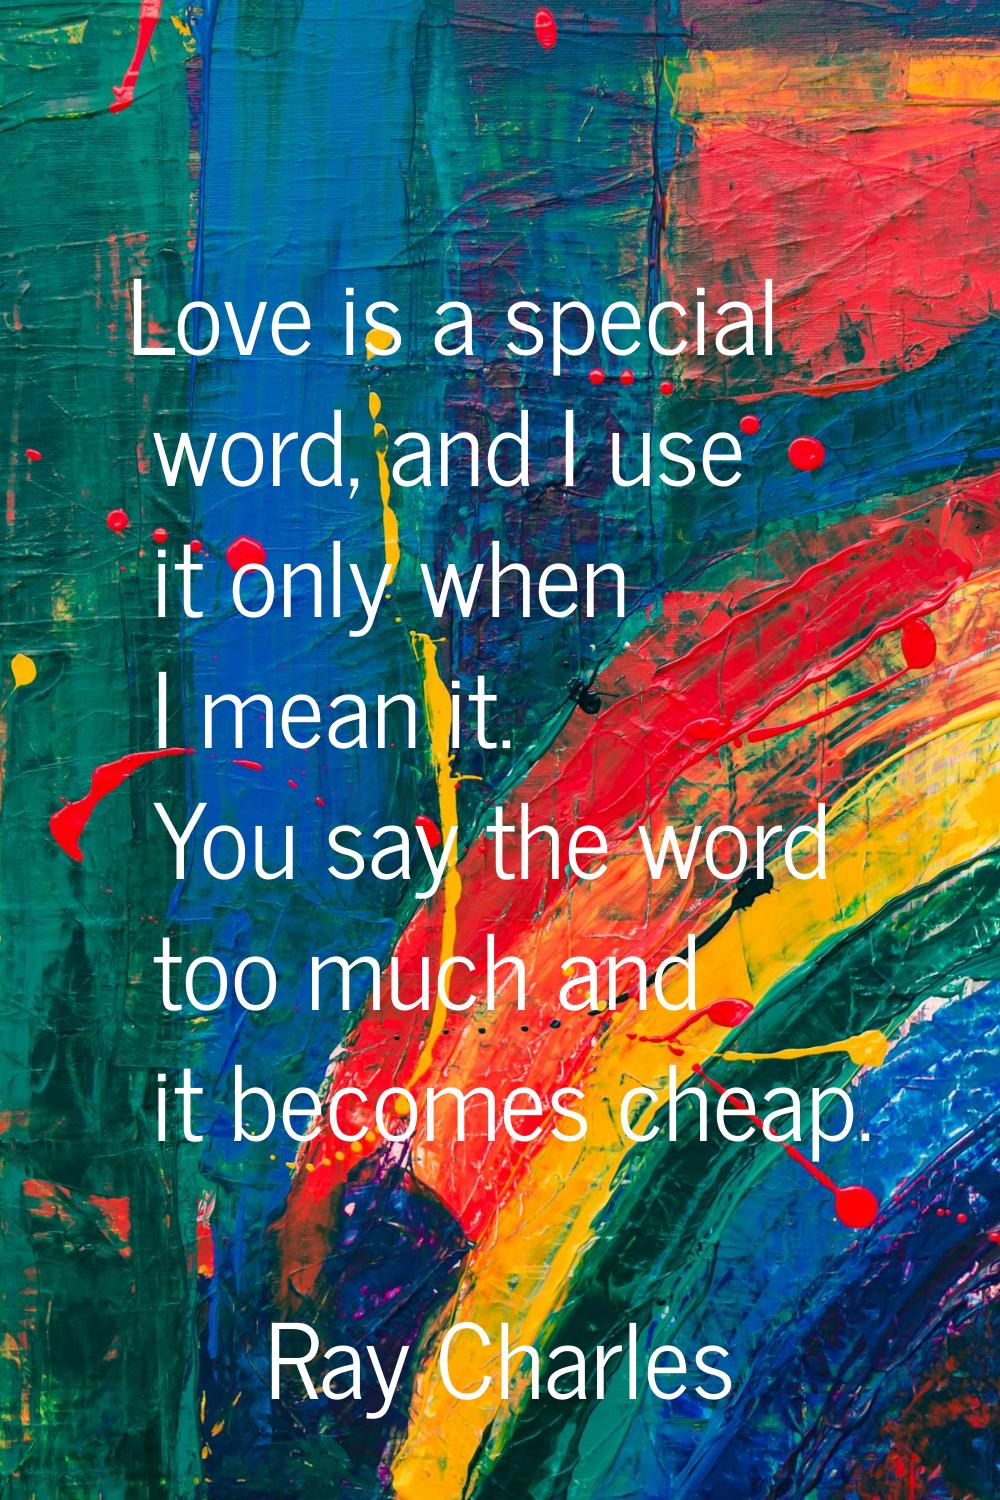 Love is a special word, and I use it only when I mean it. You say the word too much and it becomes 